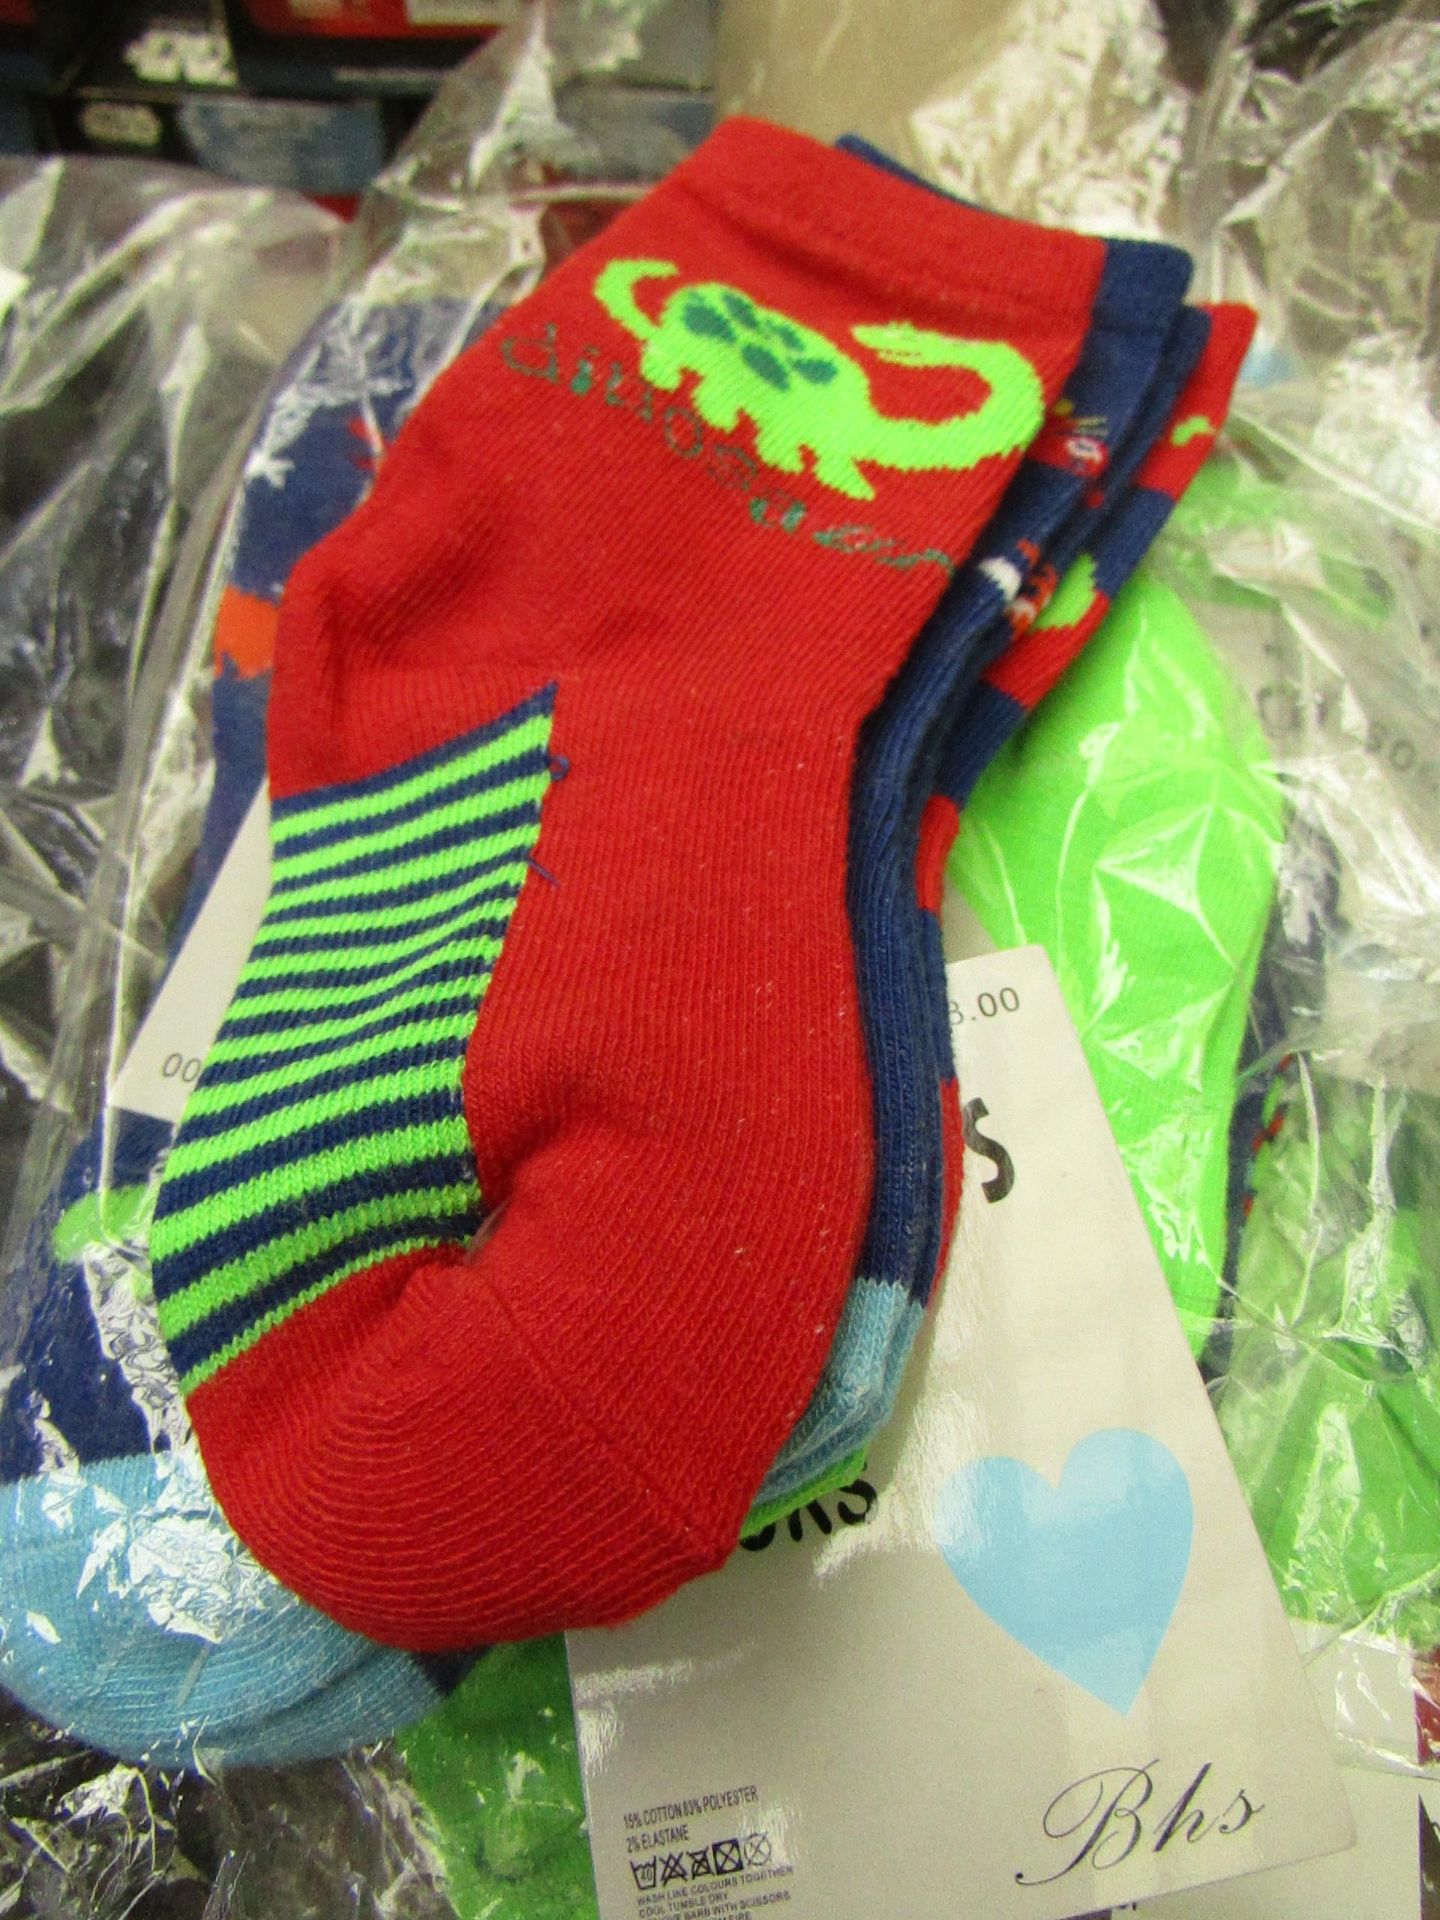 12 x pairs of boys Dinosaur Socks  size 6-8.5 new in packaging